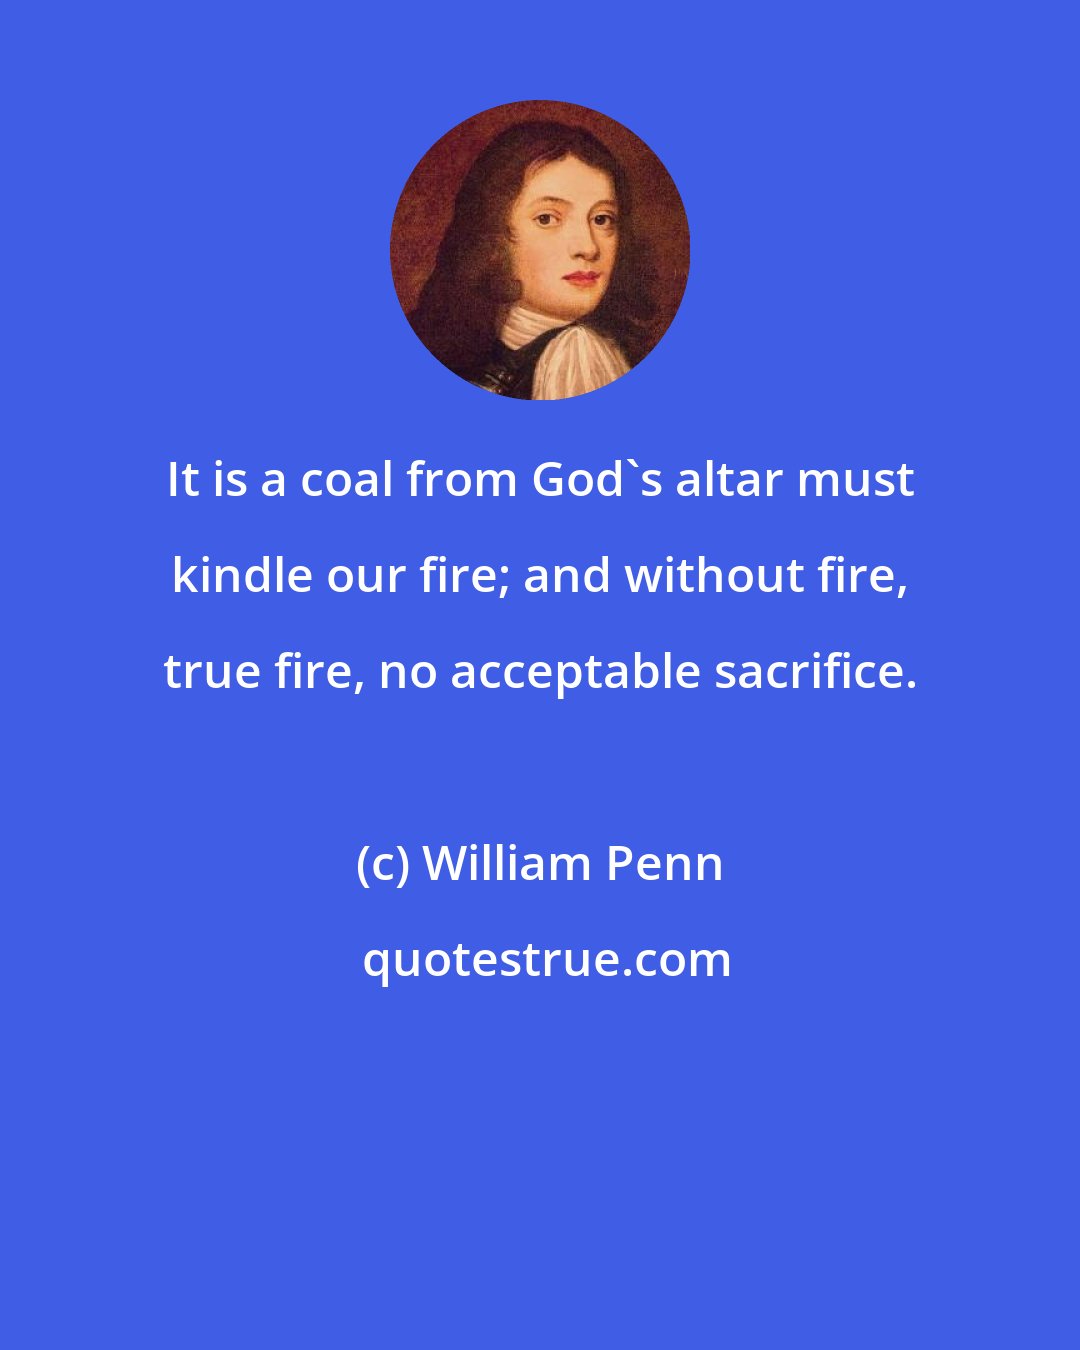 William Penn: It is a coal from God's altar must kindle our fire; and without fire, true fire, no acceptable sacrifice.